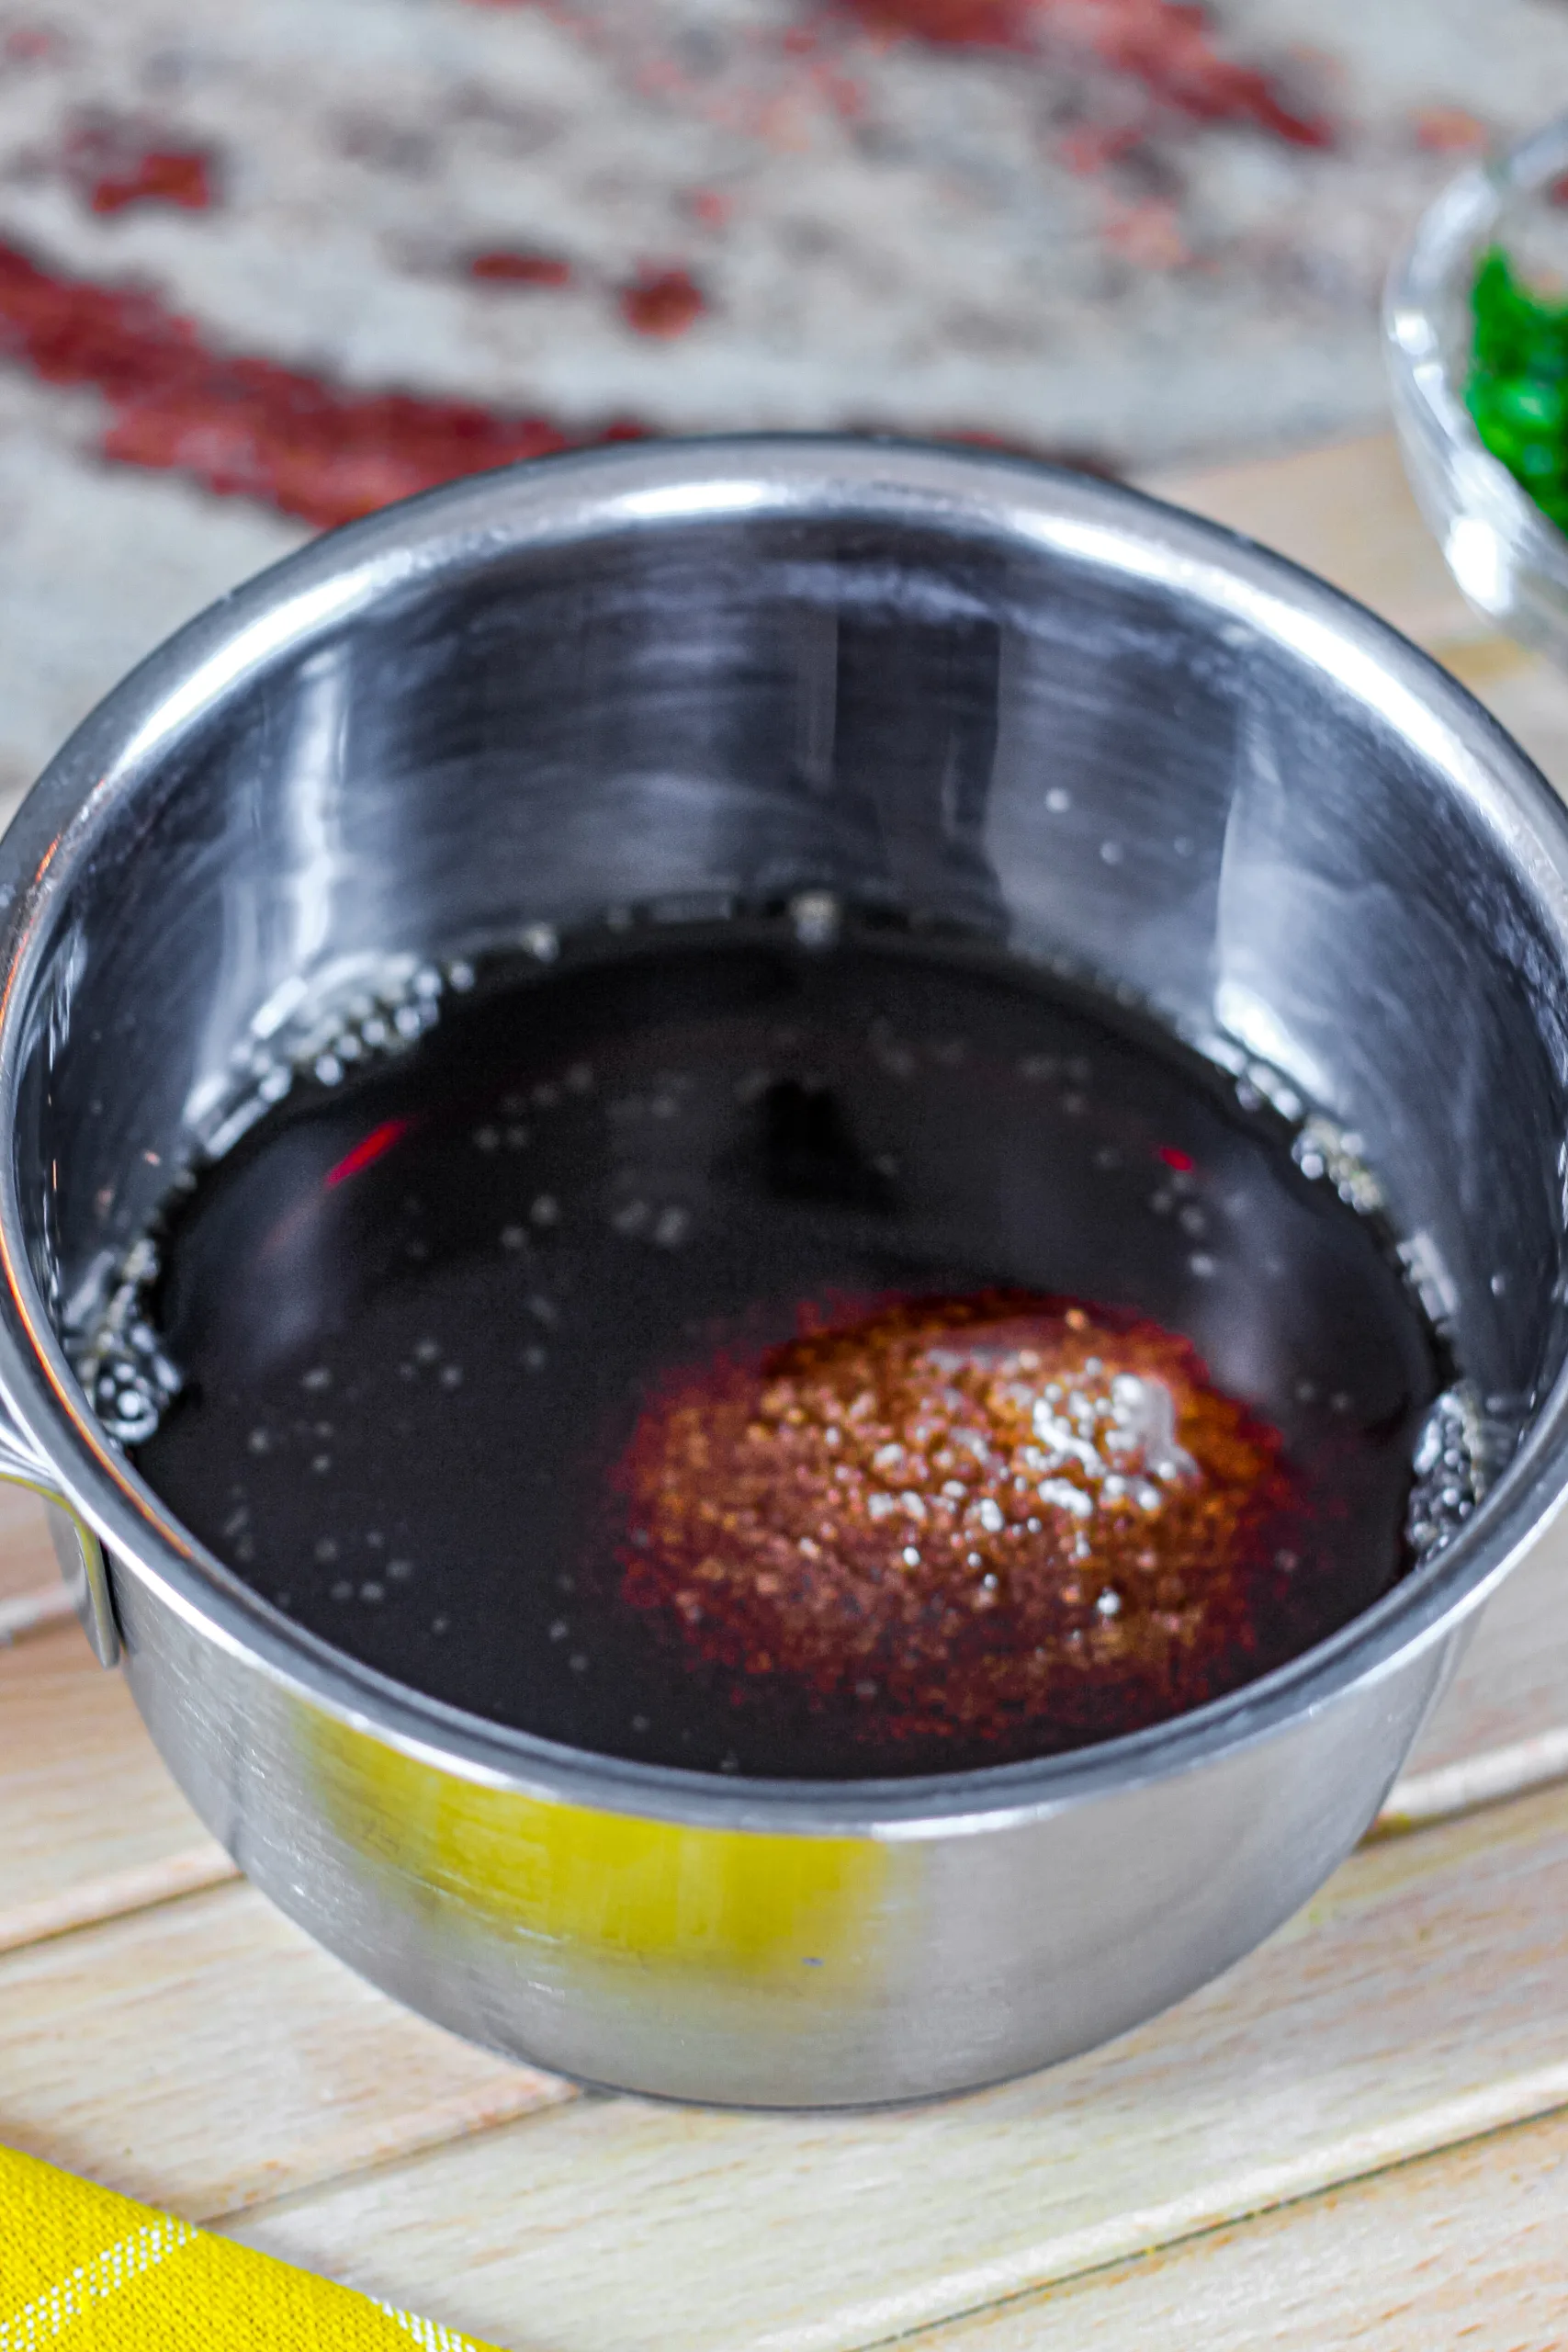 Pour one cup of balsamic vinegar into a pot over medium-high heat.